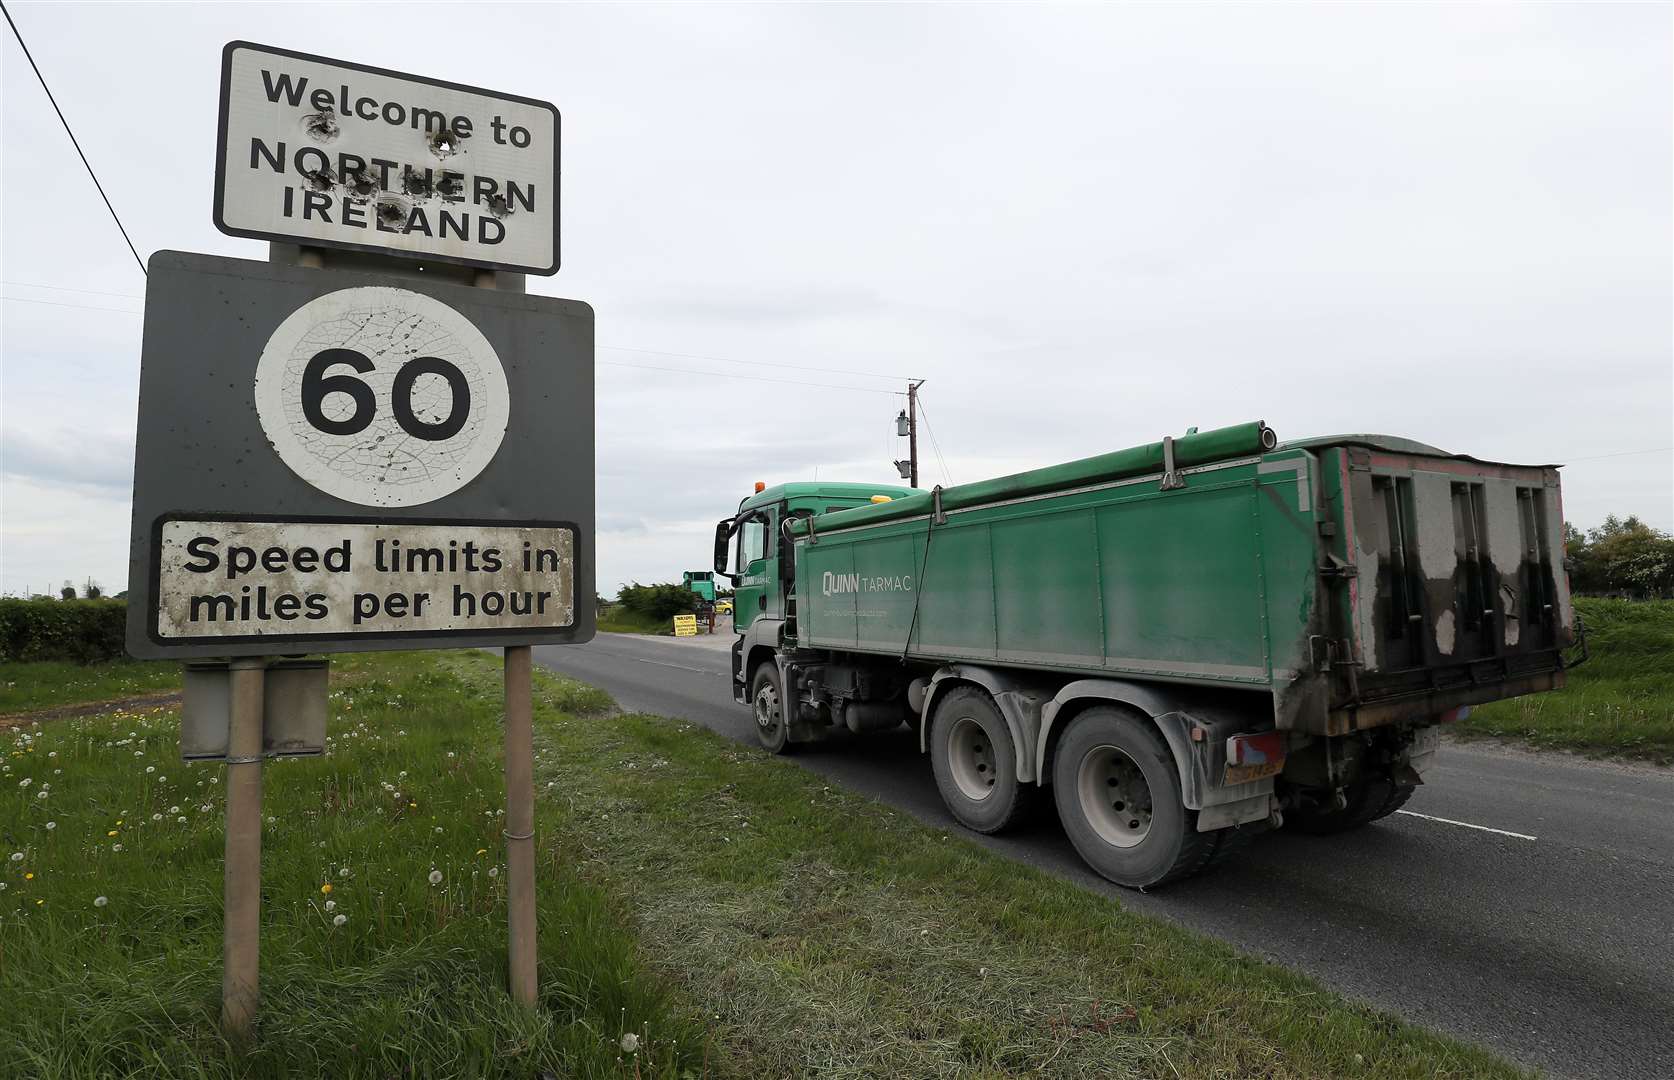 The protocol was agreed between the EU and UK as a way to maintain a free-flowing Irish land border post-Brexit (Brian Lawless/PA)